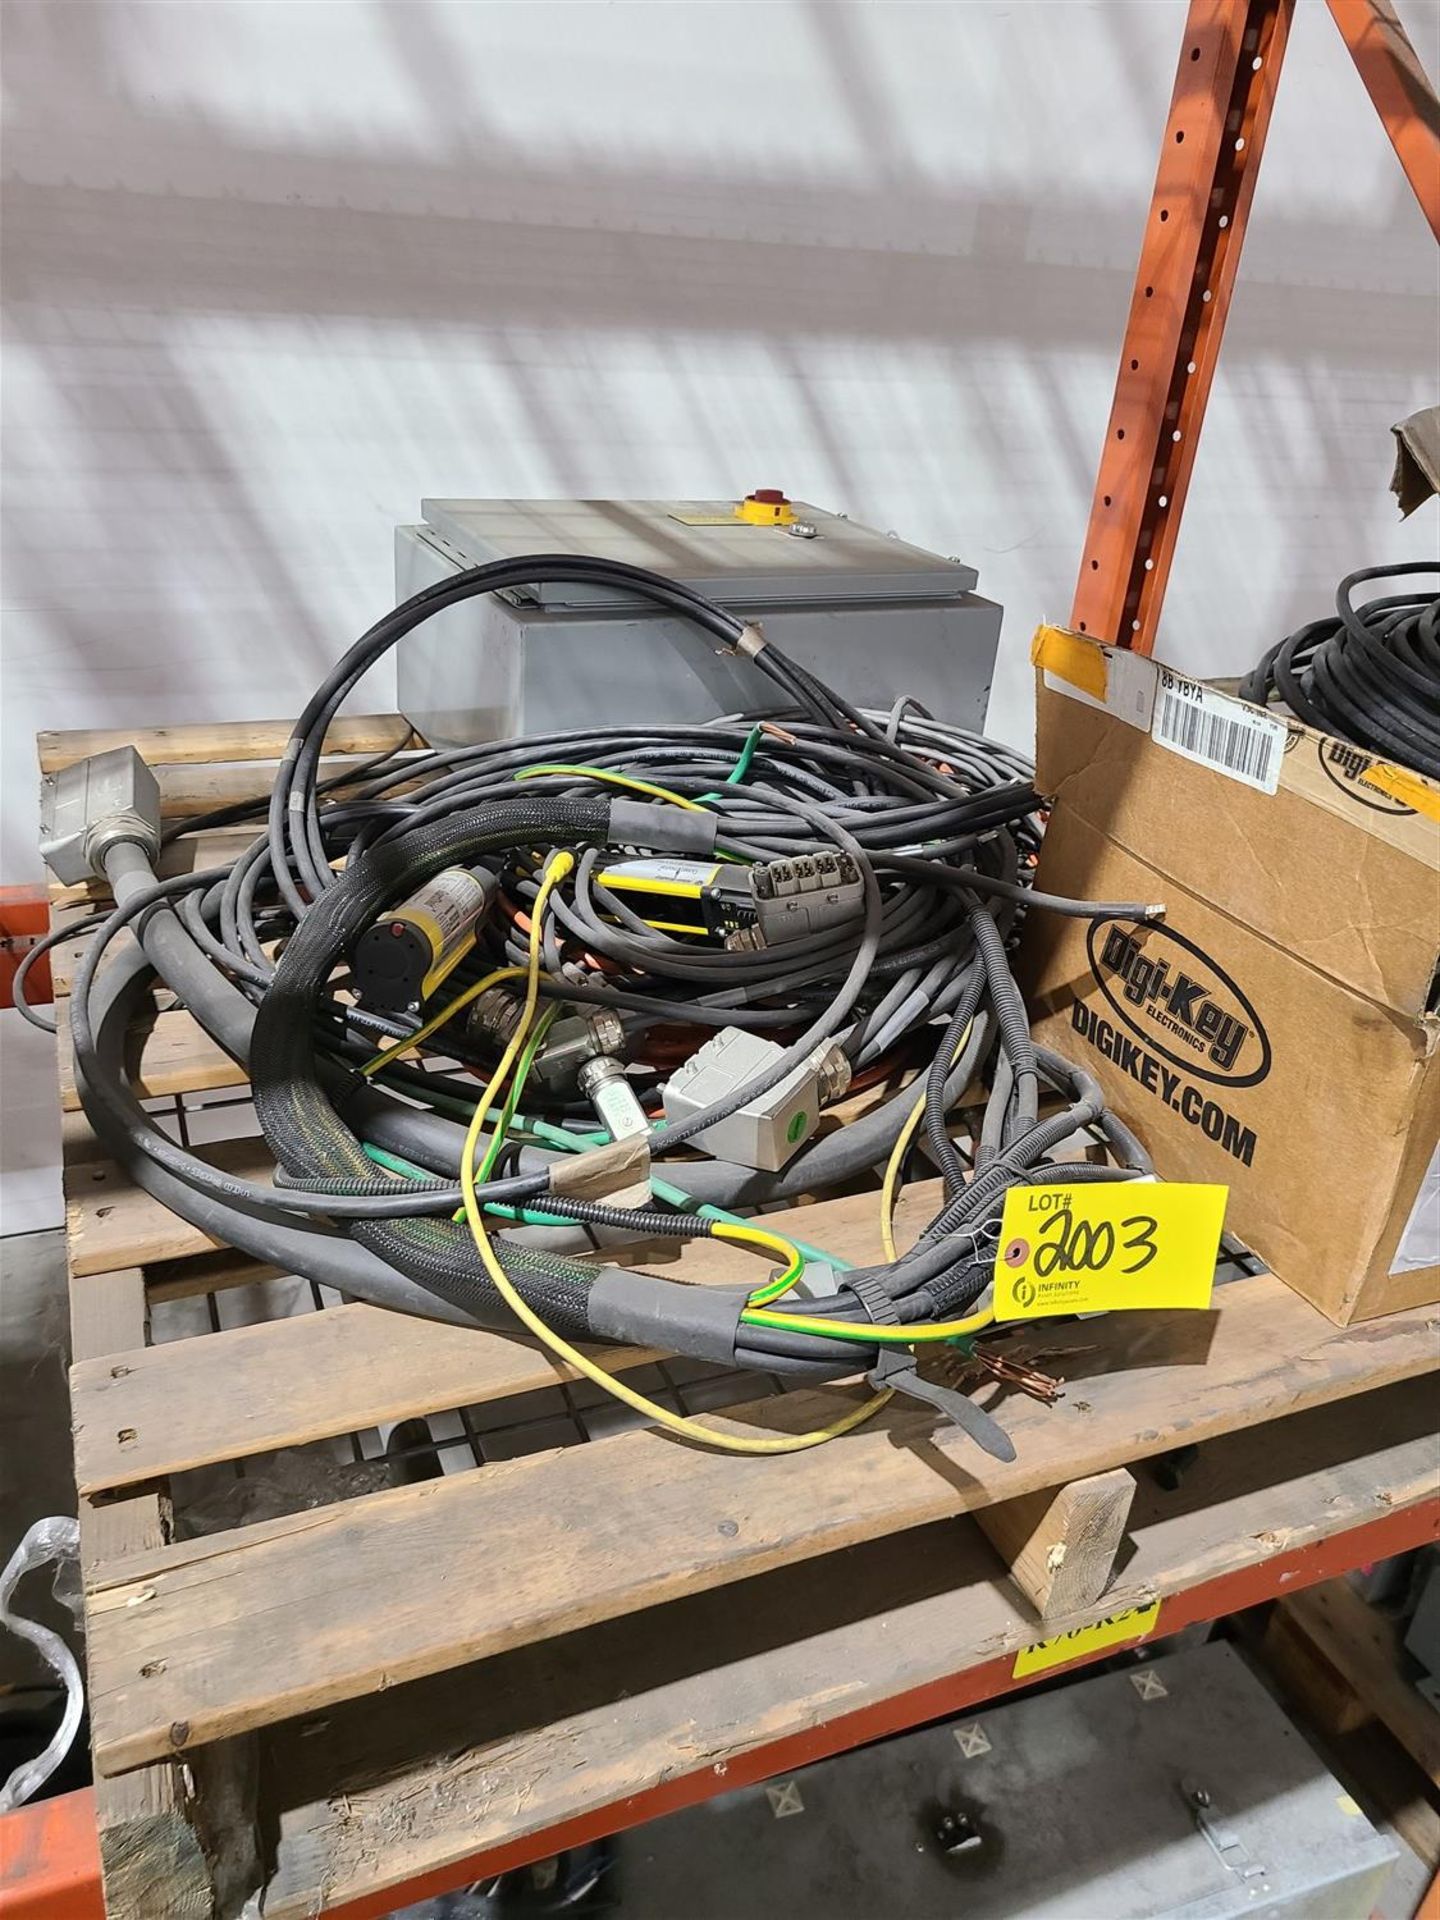 3 PALLETS OF 2 ELECTRICAL BOXES WIRE ETC. - Image 3 of 4